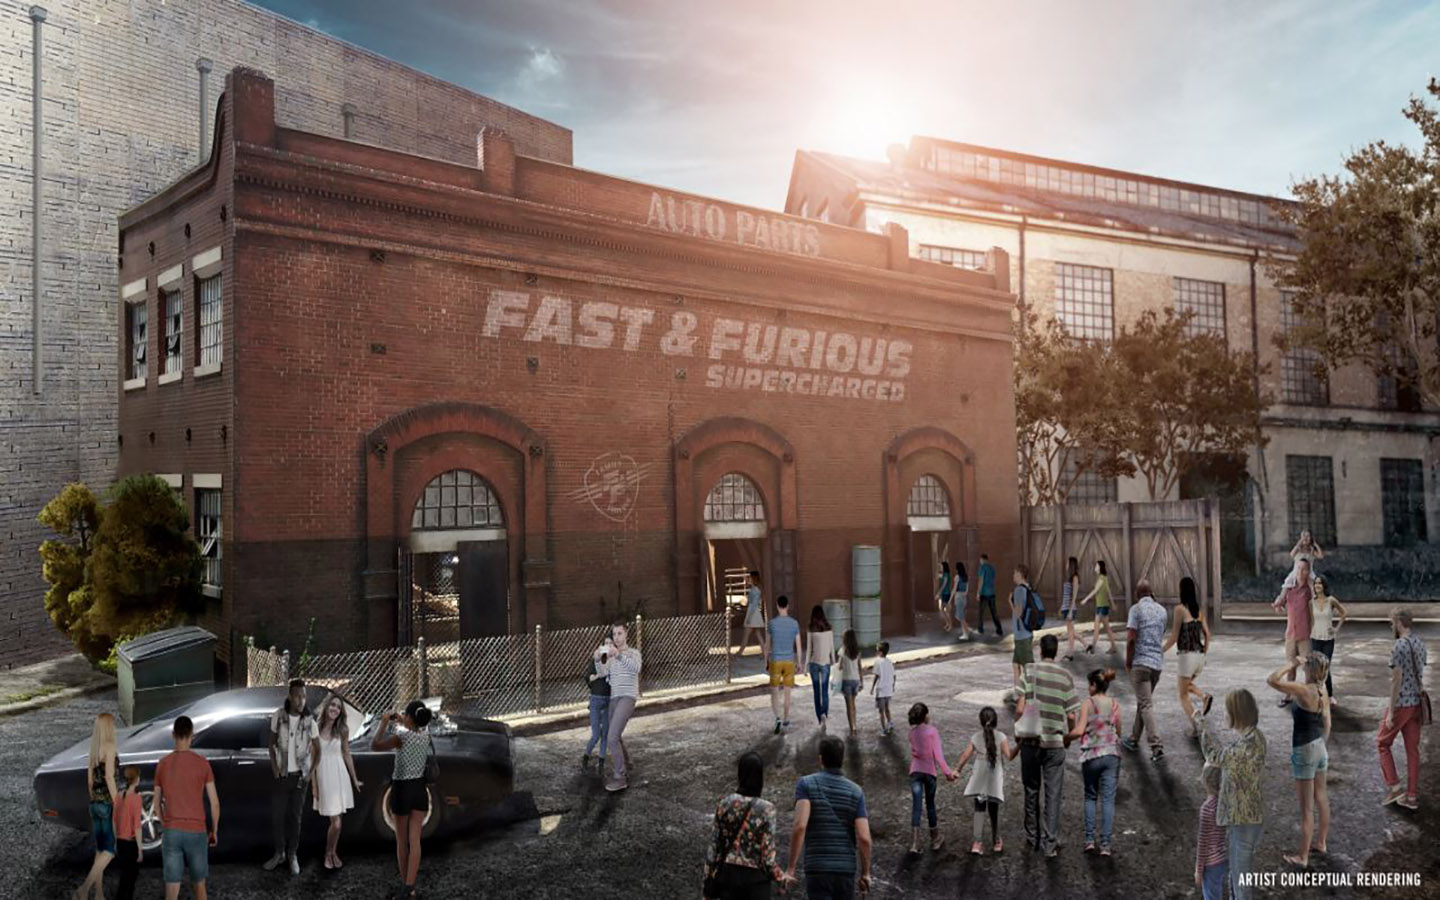 Fast & Furious - Supercharged Exterior Rendering